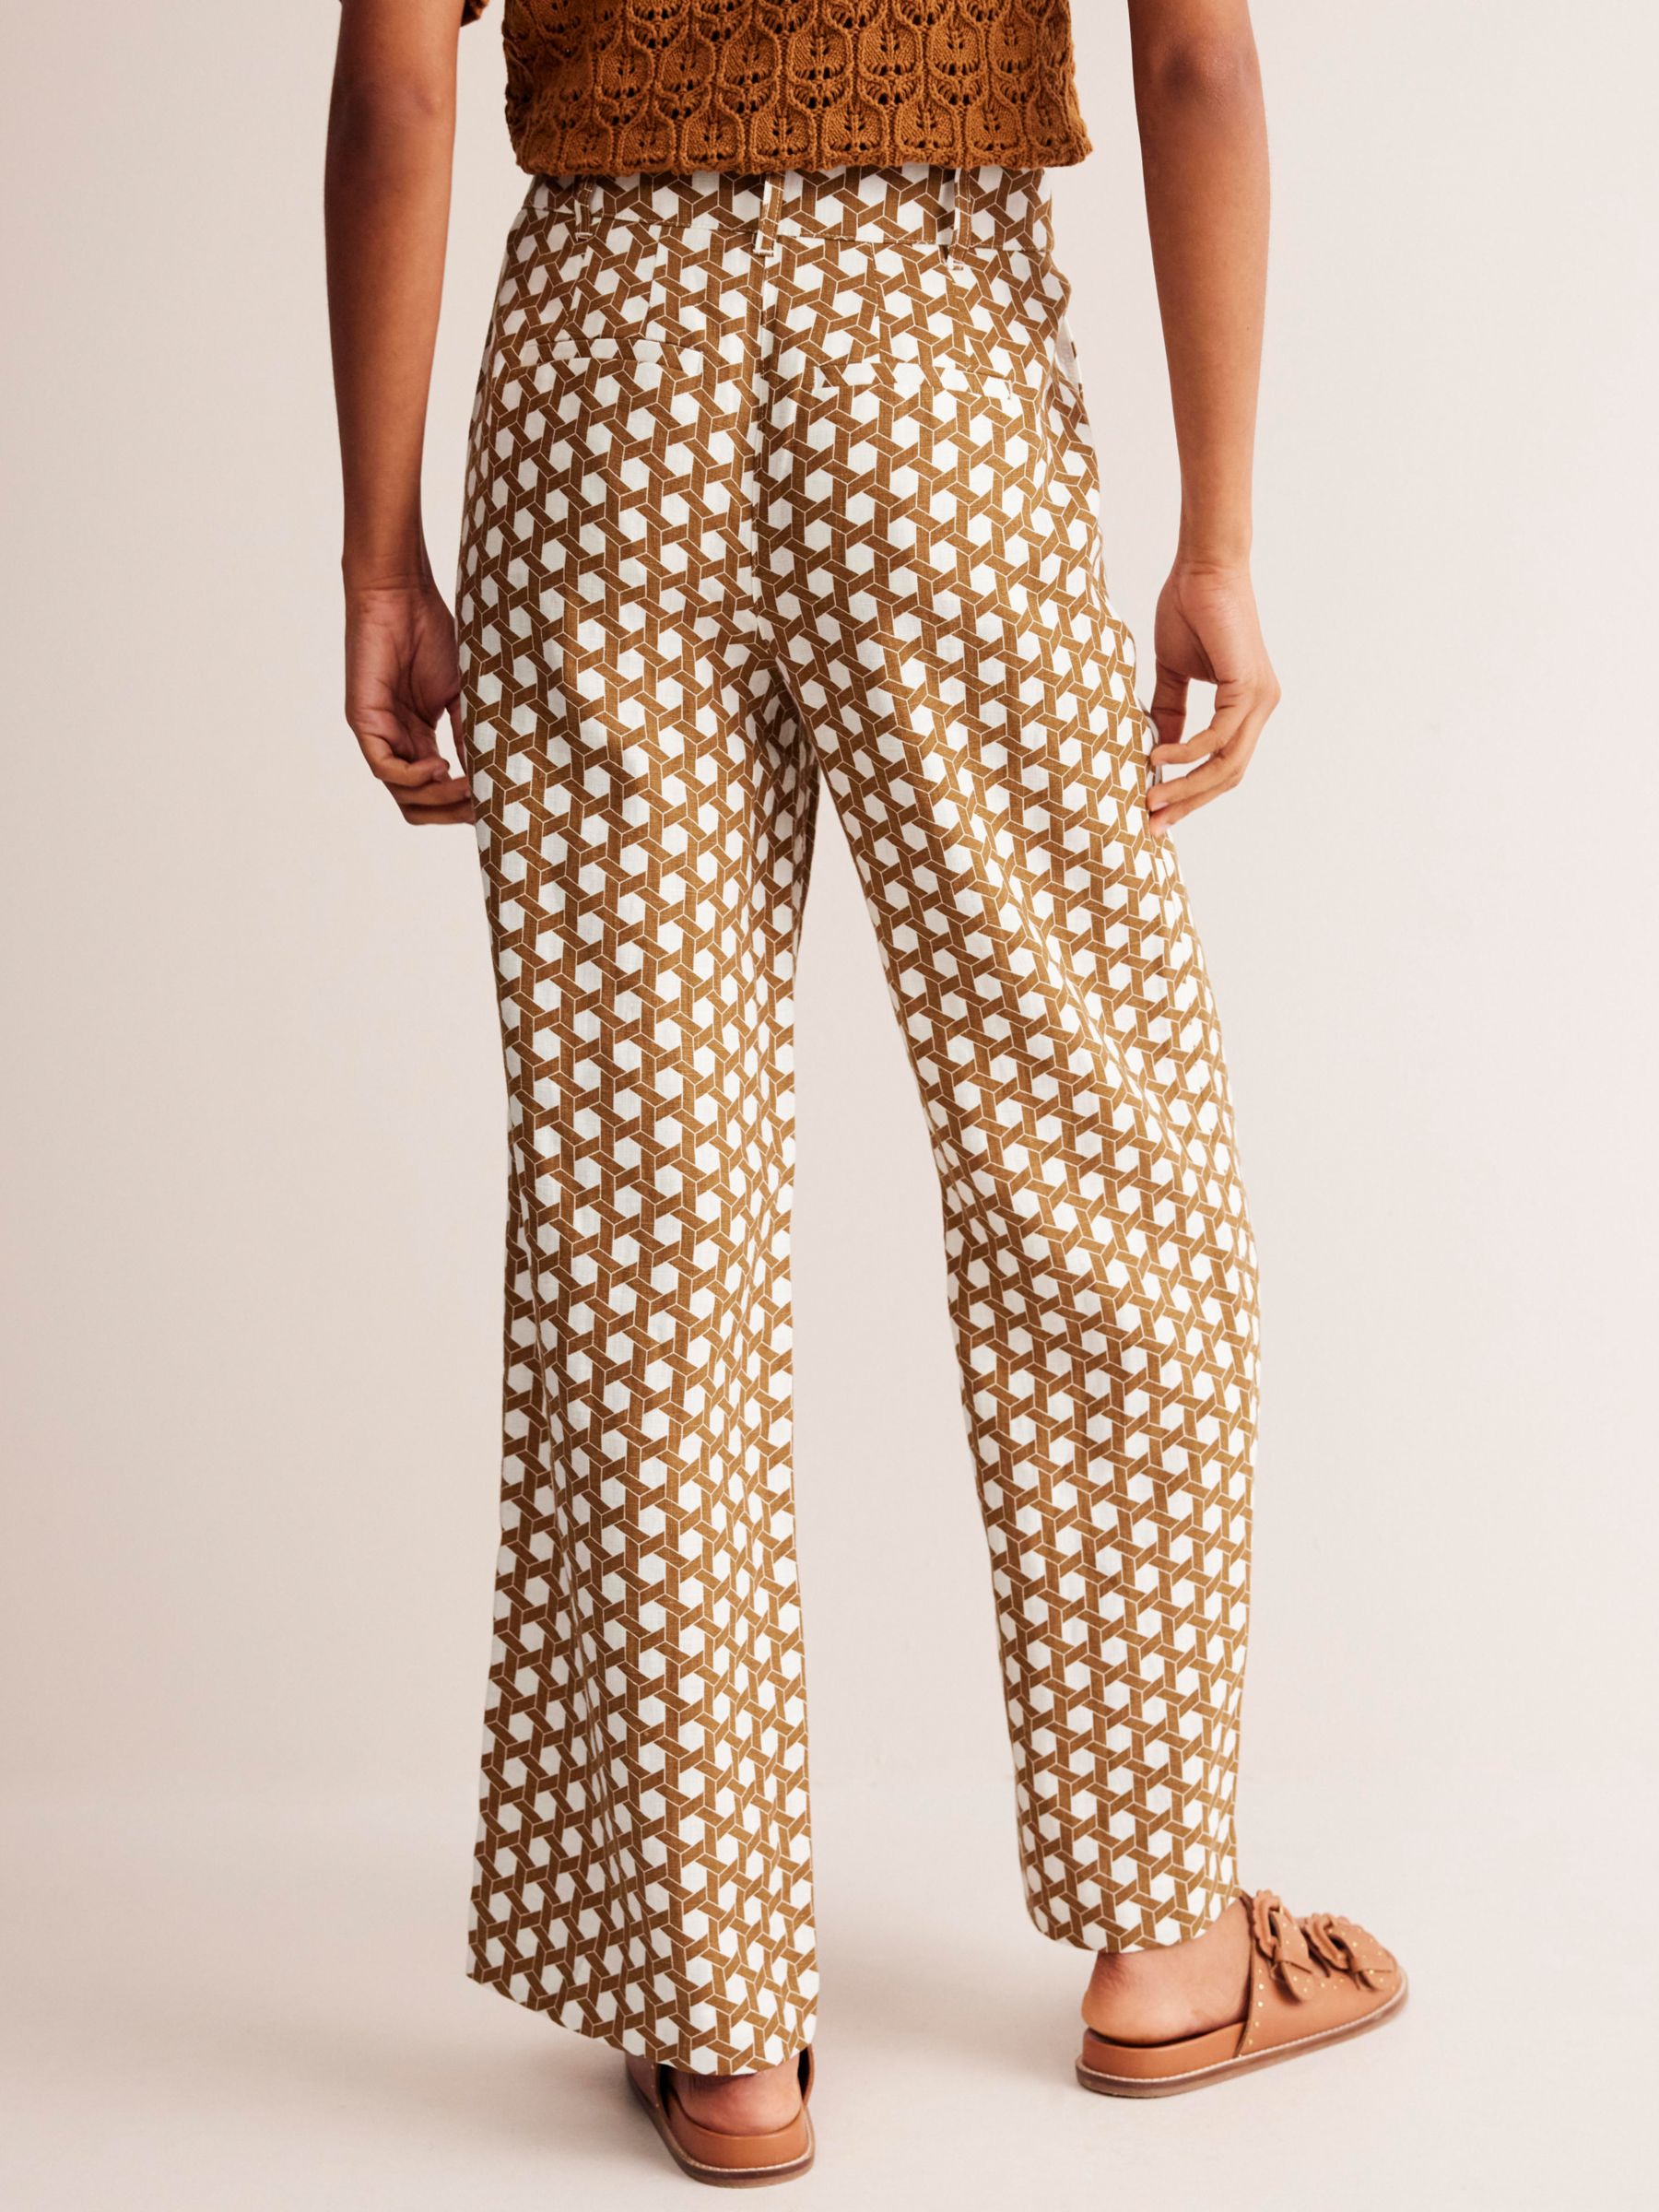 Buy Boden Westbourne Geometric Honeycomb Print Linen Trousers, Brown/White Online at johnlewis.com